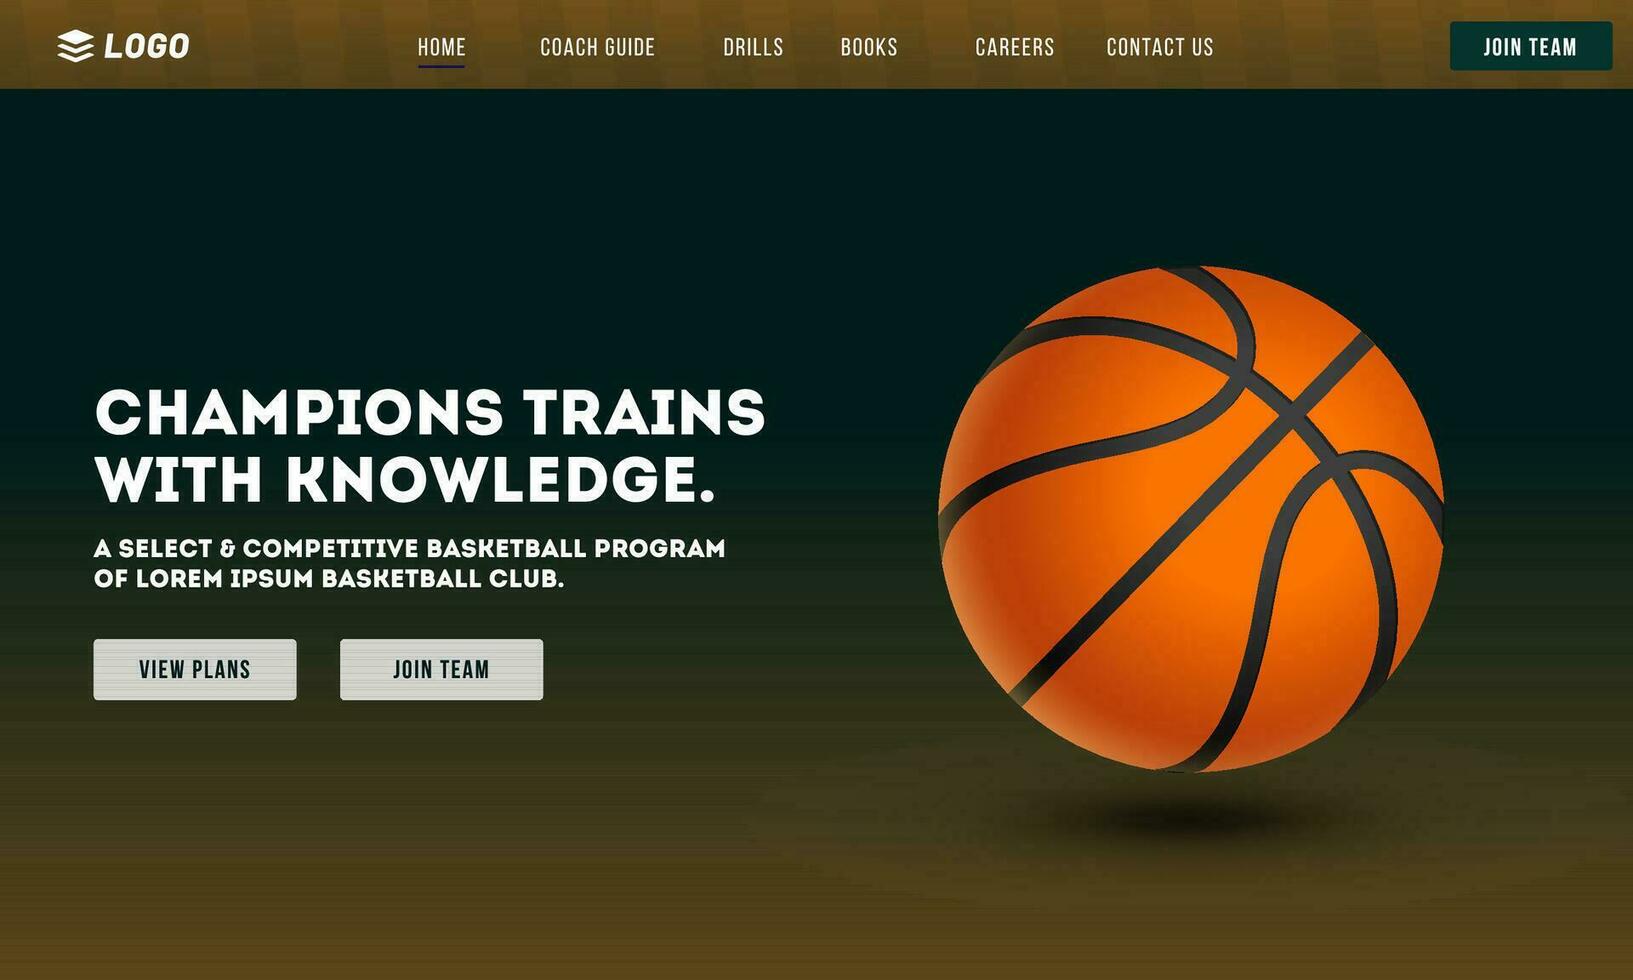 Basketball Champions Trains with Knowledge Game App or Responsive Template Design with Basketball Goal in Hoop Net